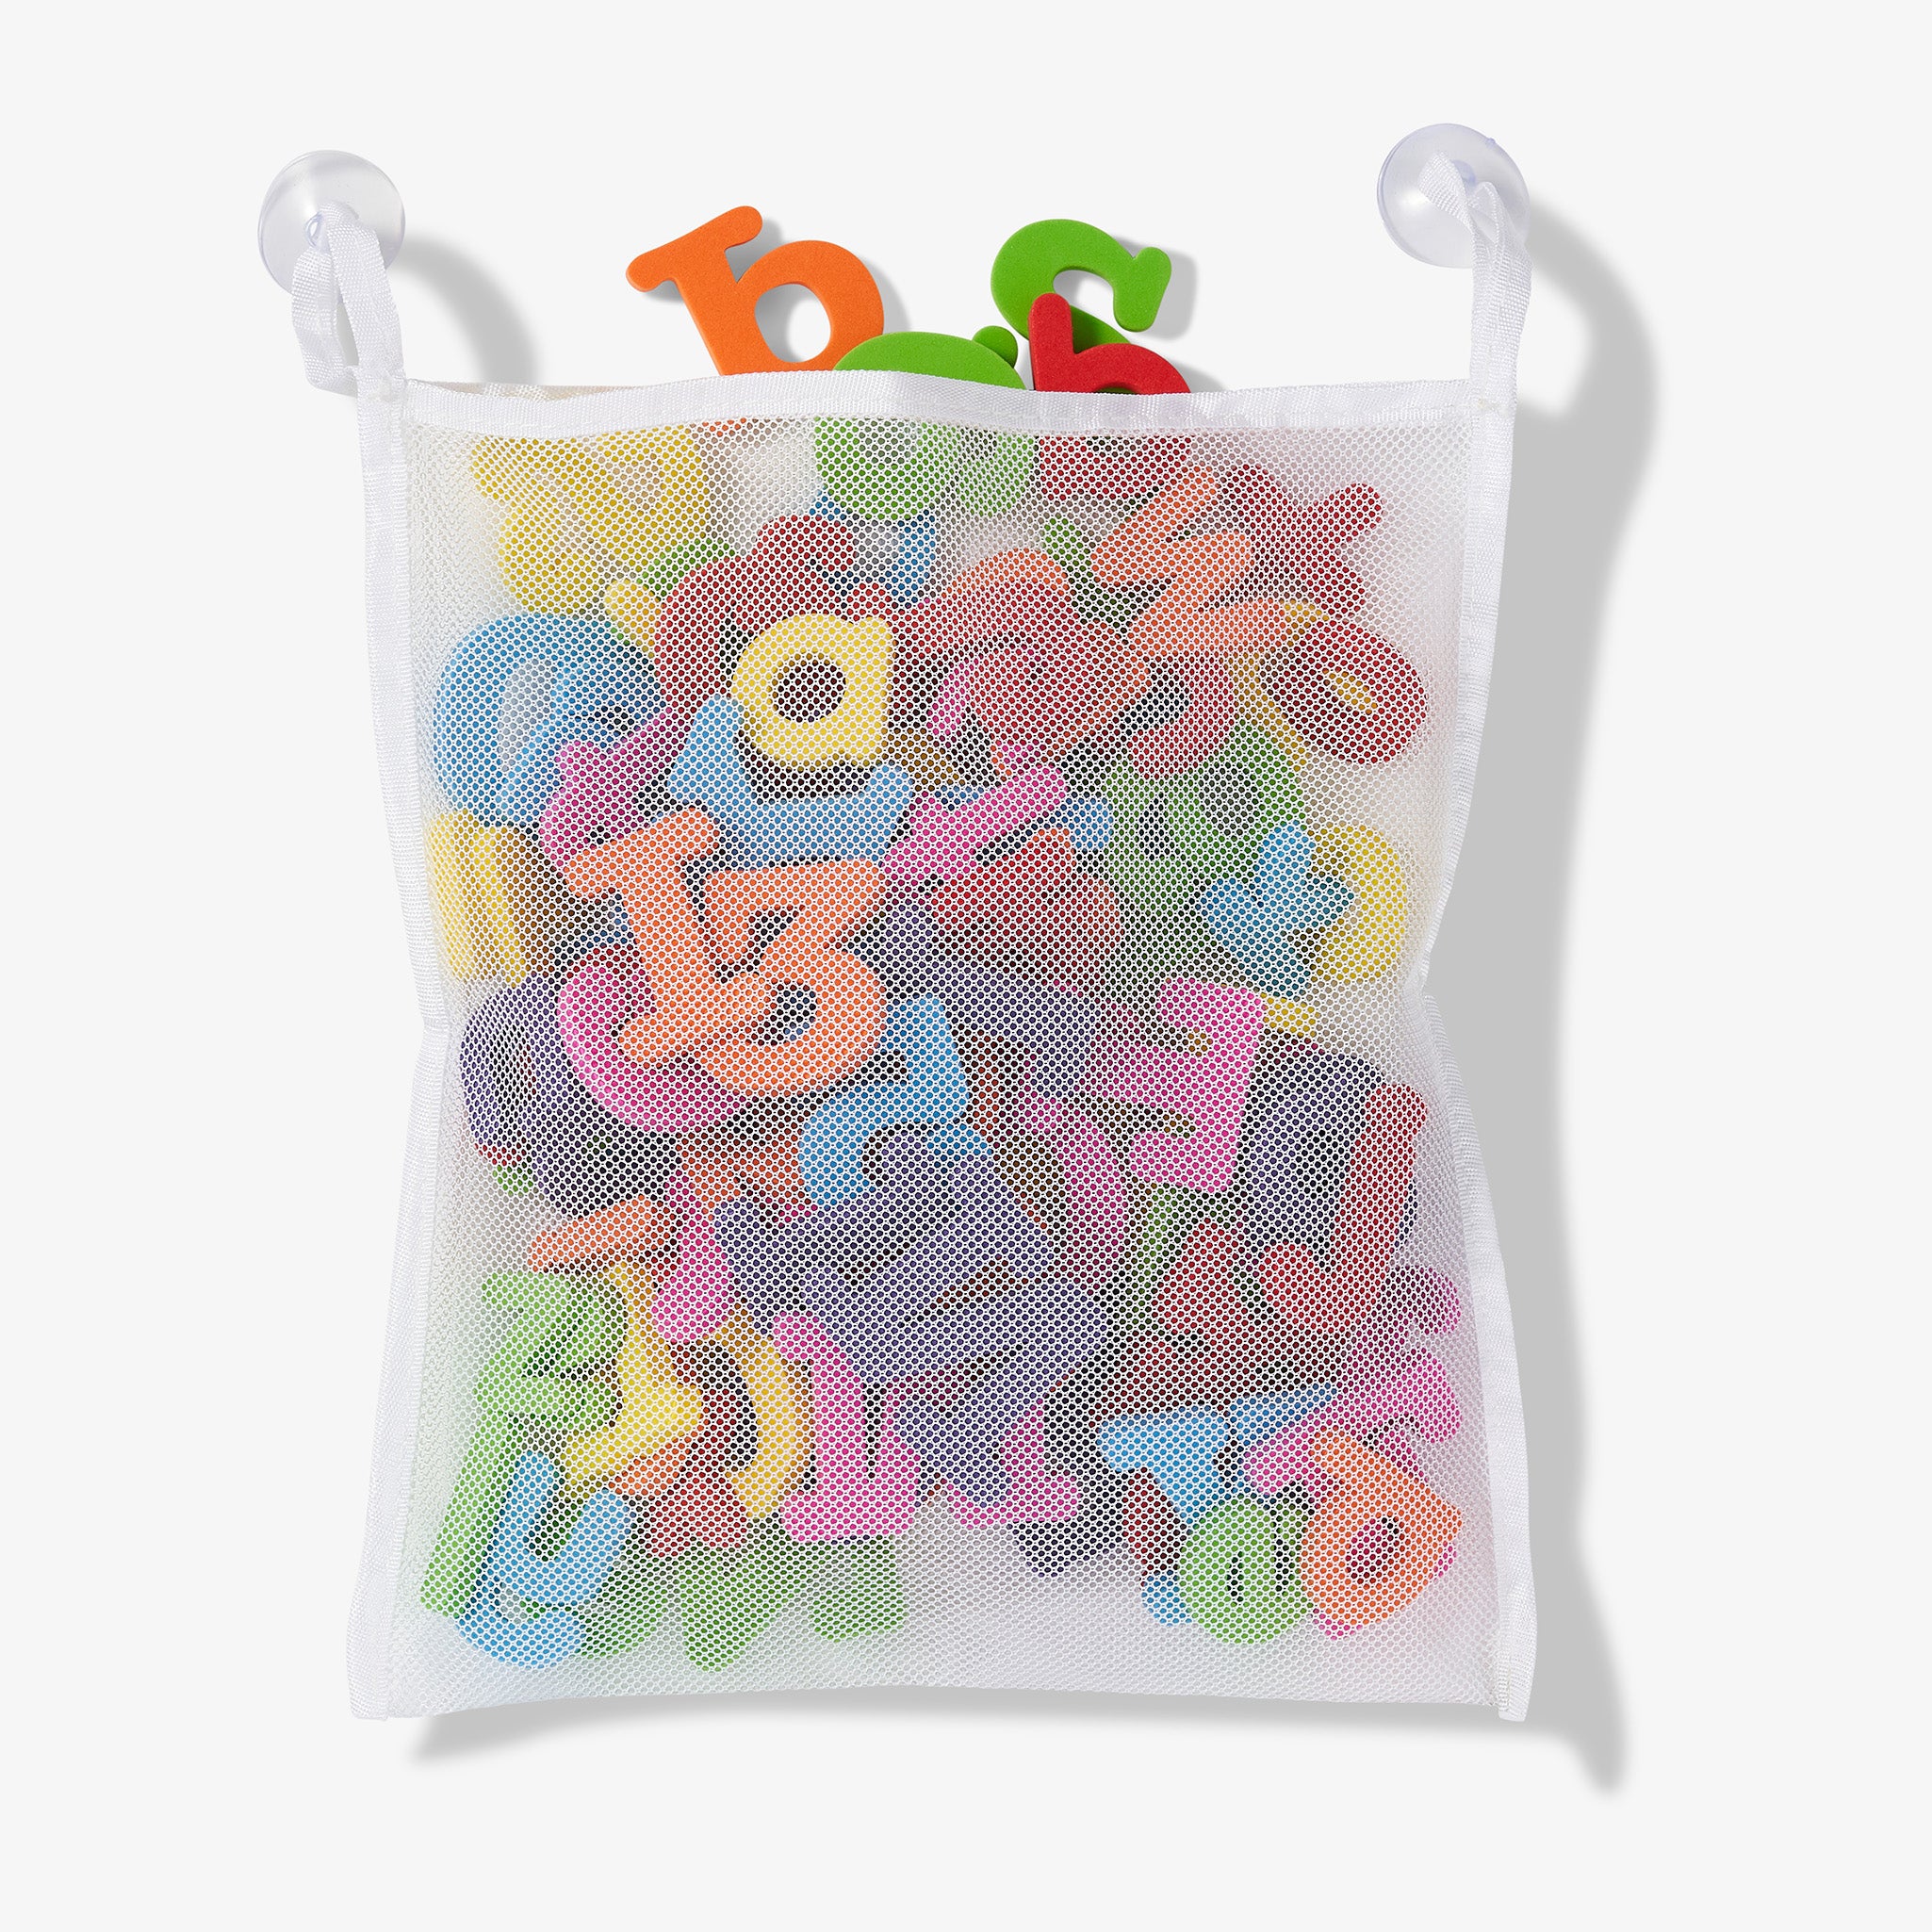 THE TWIDDLERS - 100 PCS Bath Foam Letters with Mesh Bag